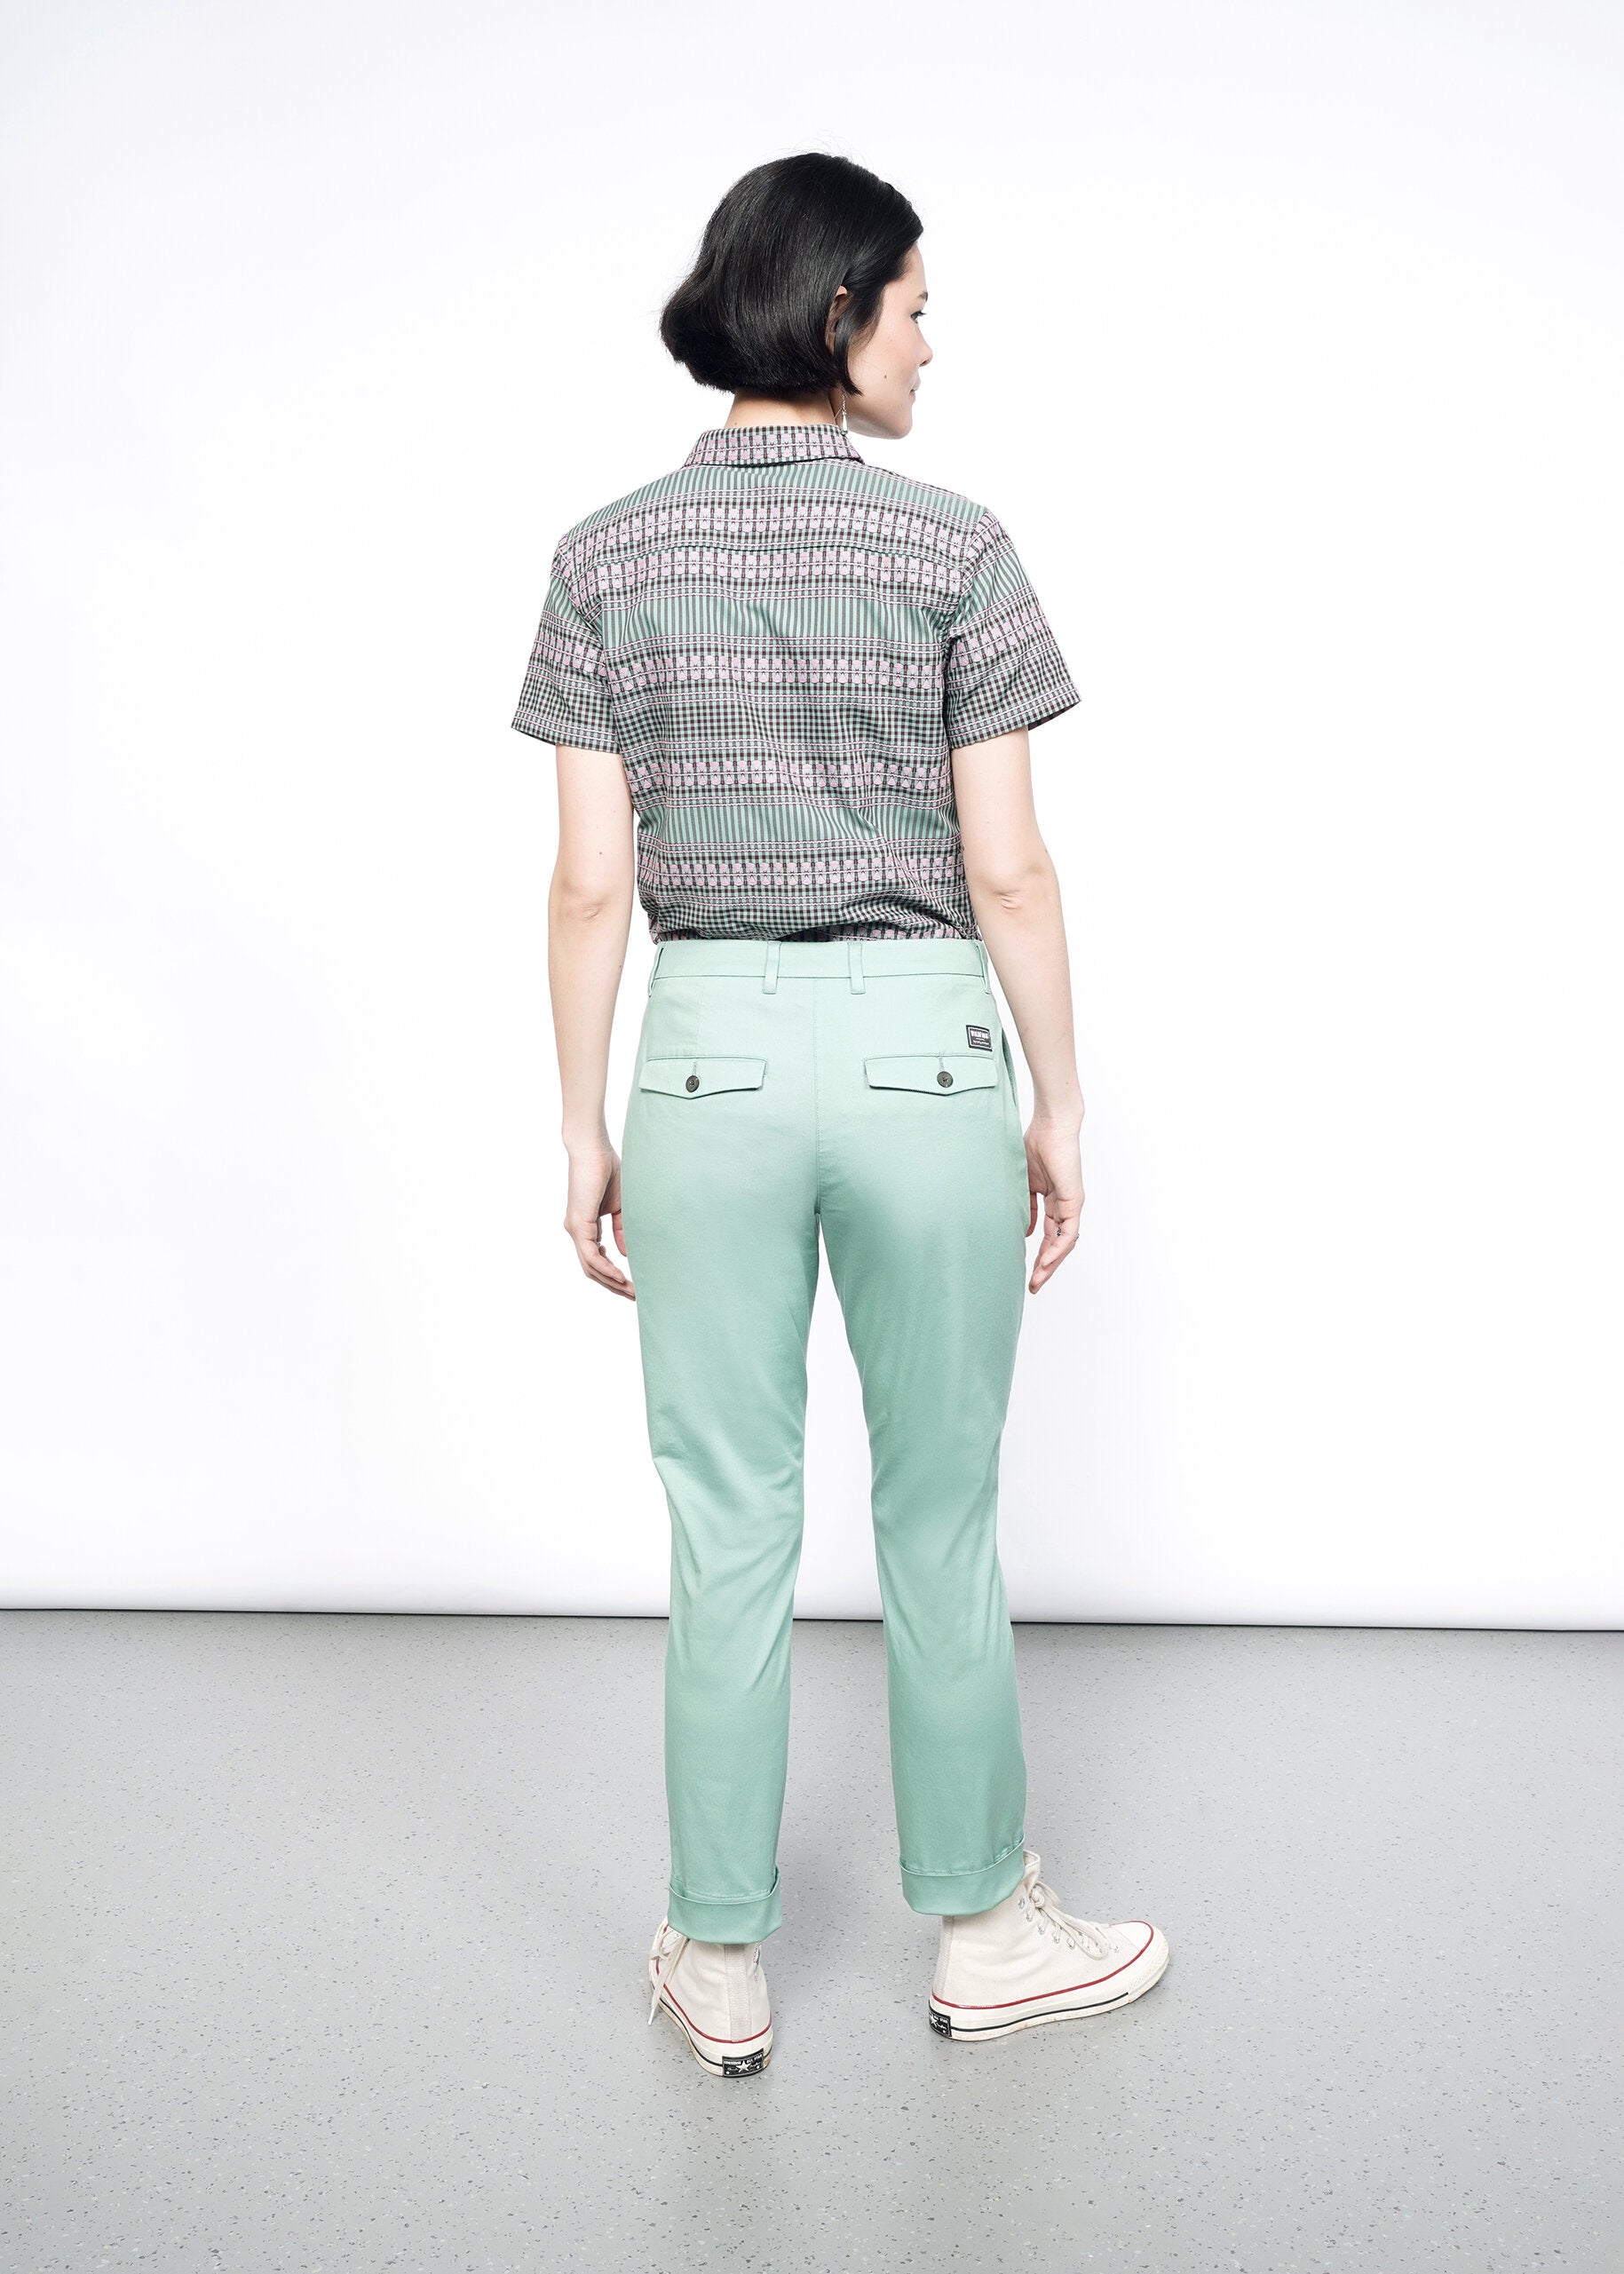 Back image of Model wearing the Essential Trouser in Sage in size 4, with the Essential Button Up in Gingham Sage